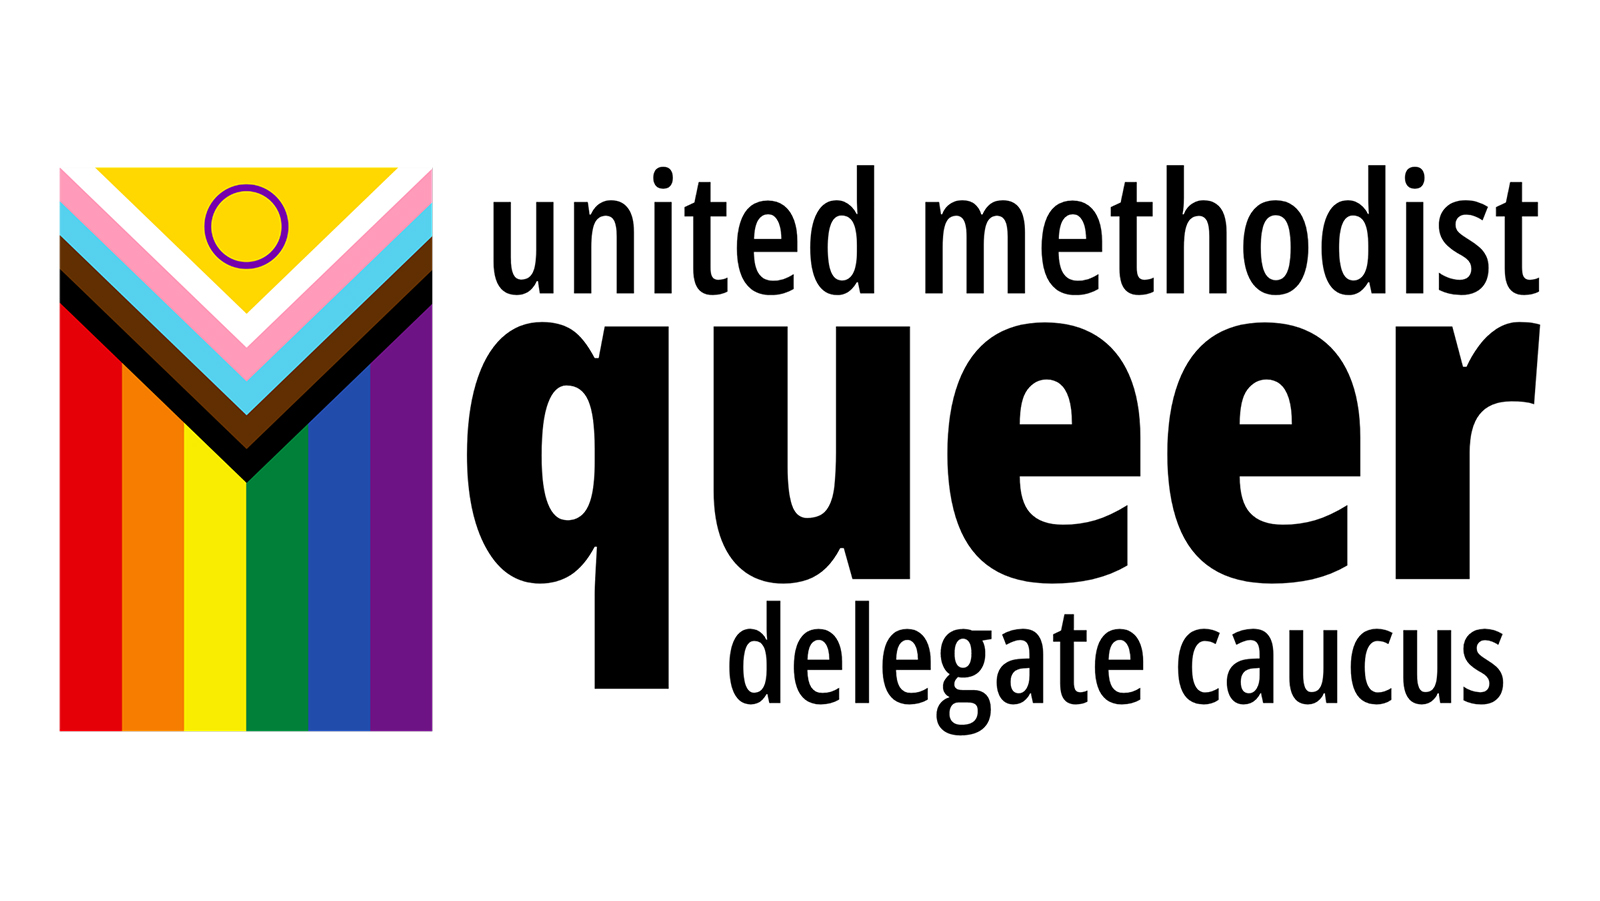 Imagery from the United Methodist Queer Delegate Caucus website. (Screen grab)